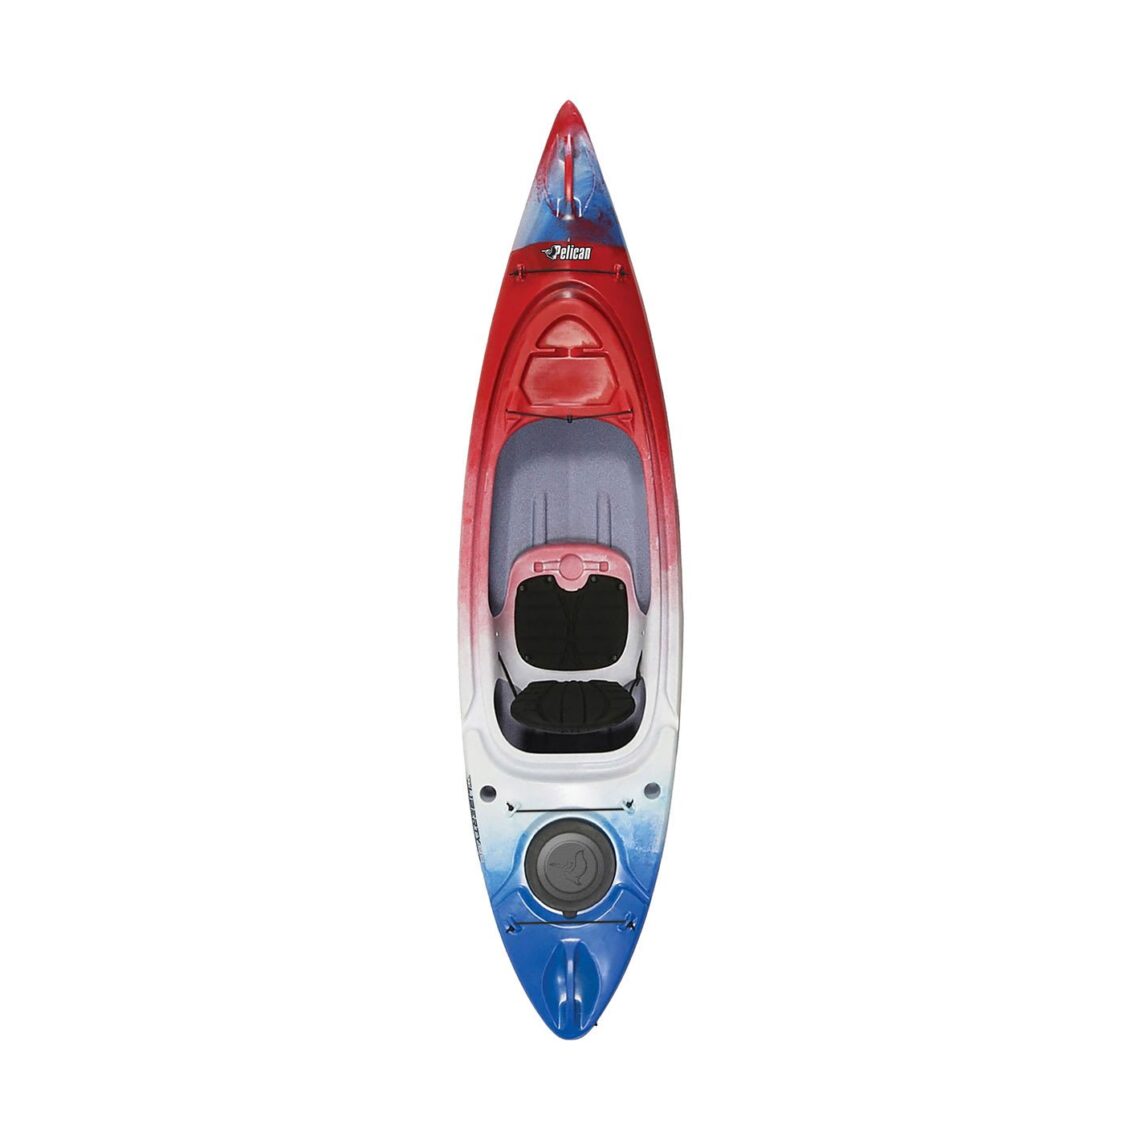 PELICAN LIBERTY 9.5 RED, WHITE AND BLUE KAYAK - Northwoods Wholesale Outlet